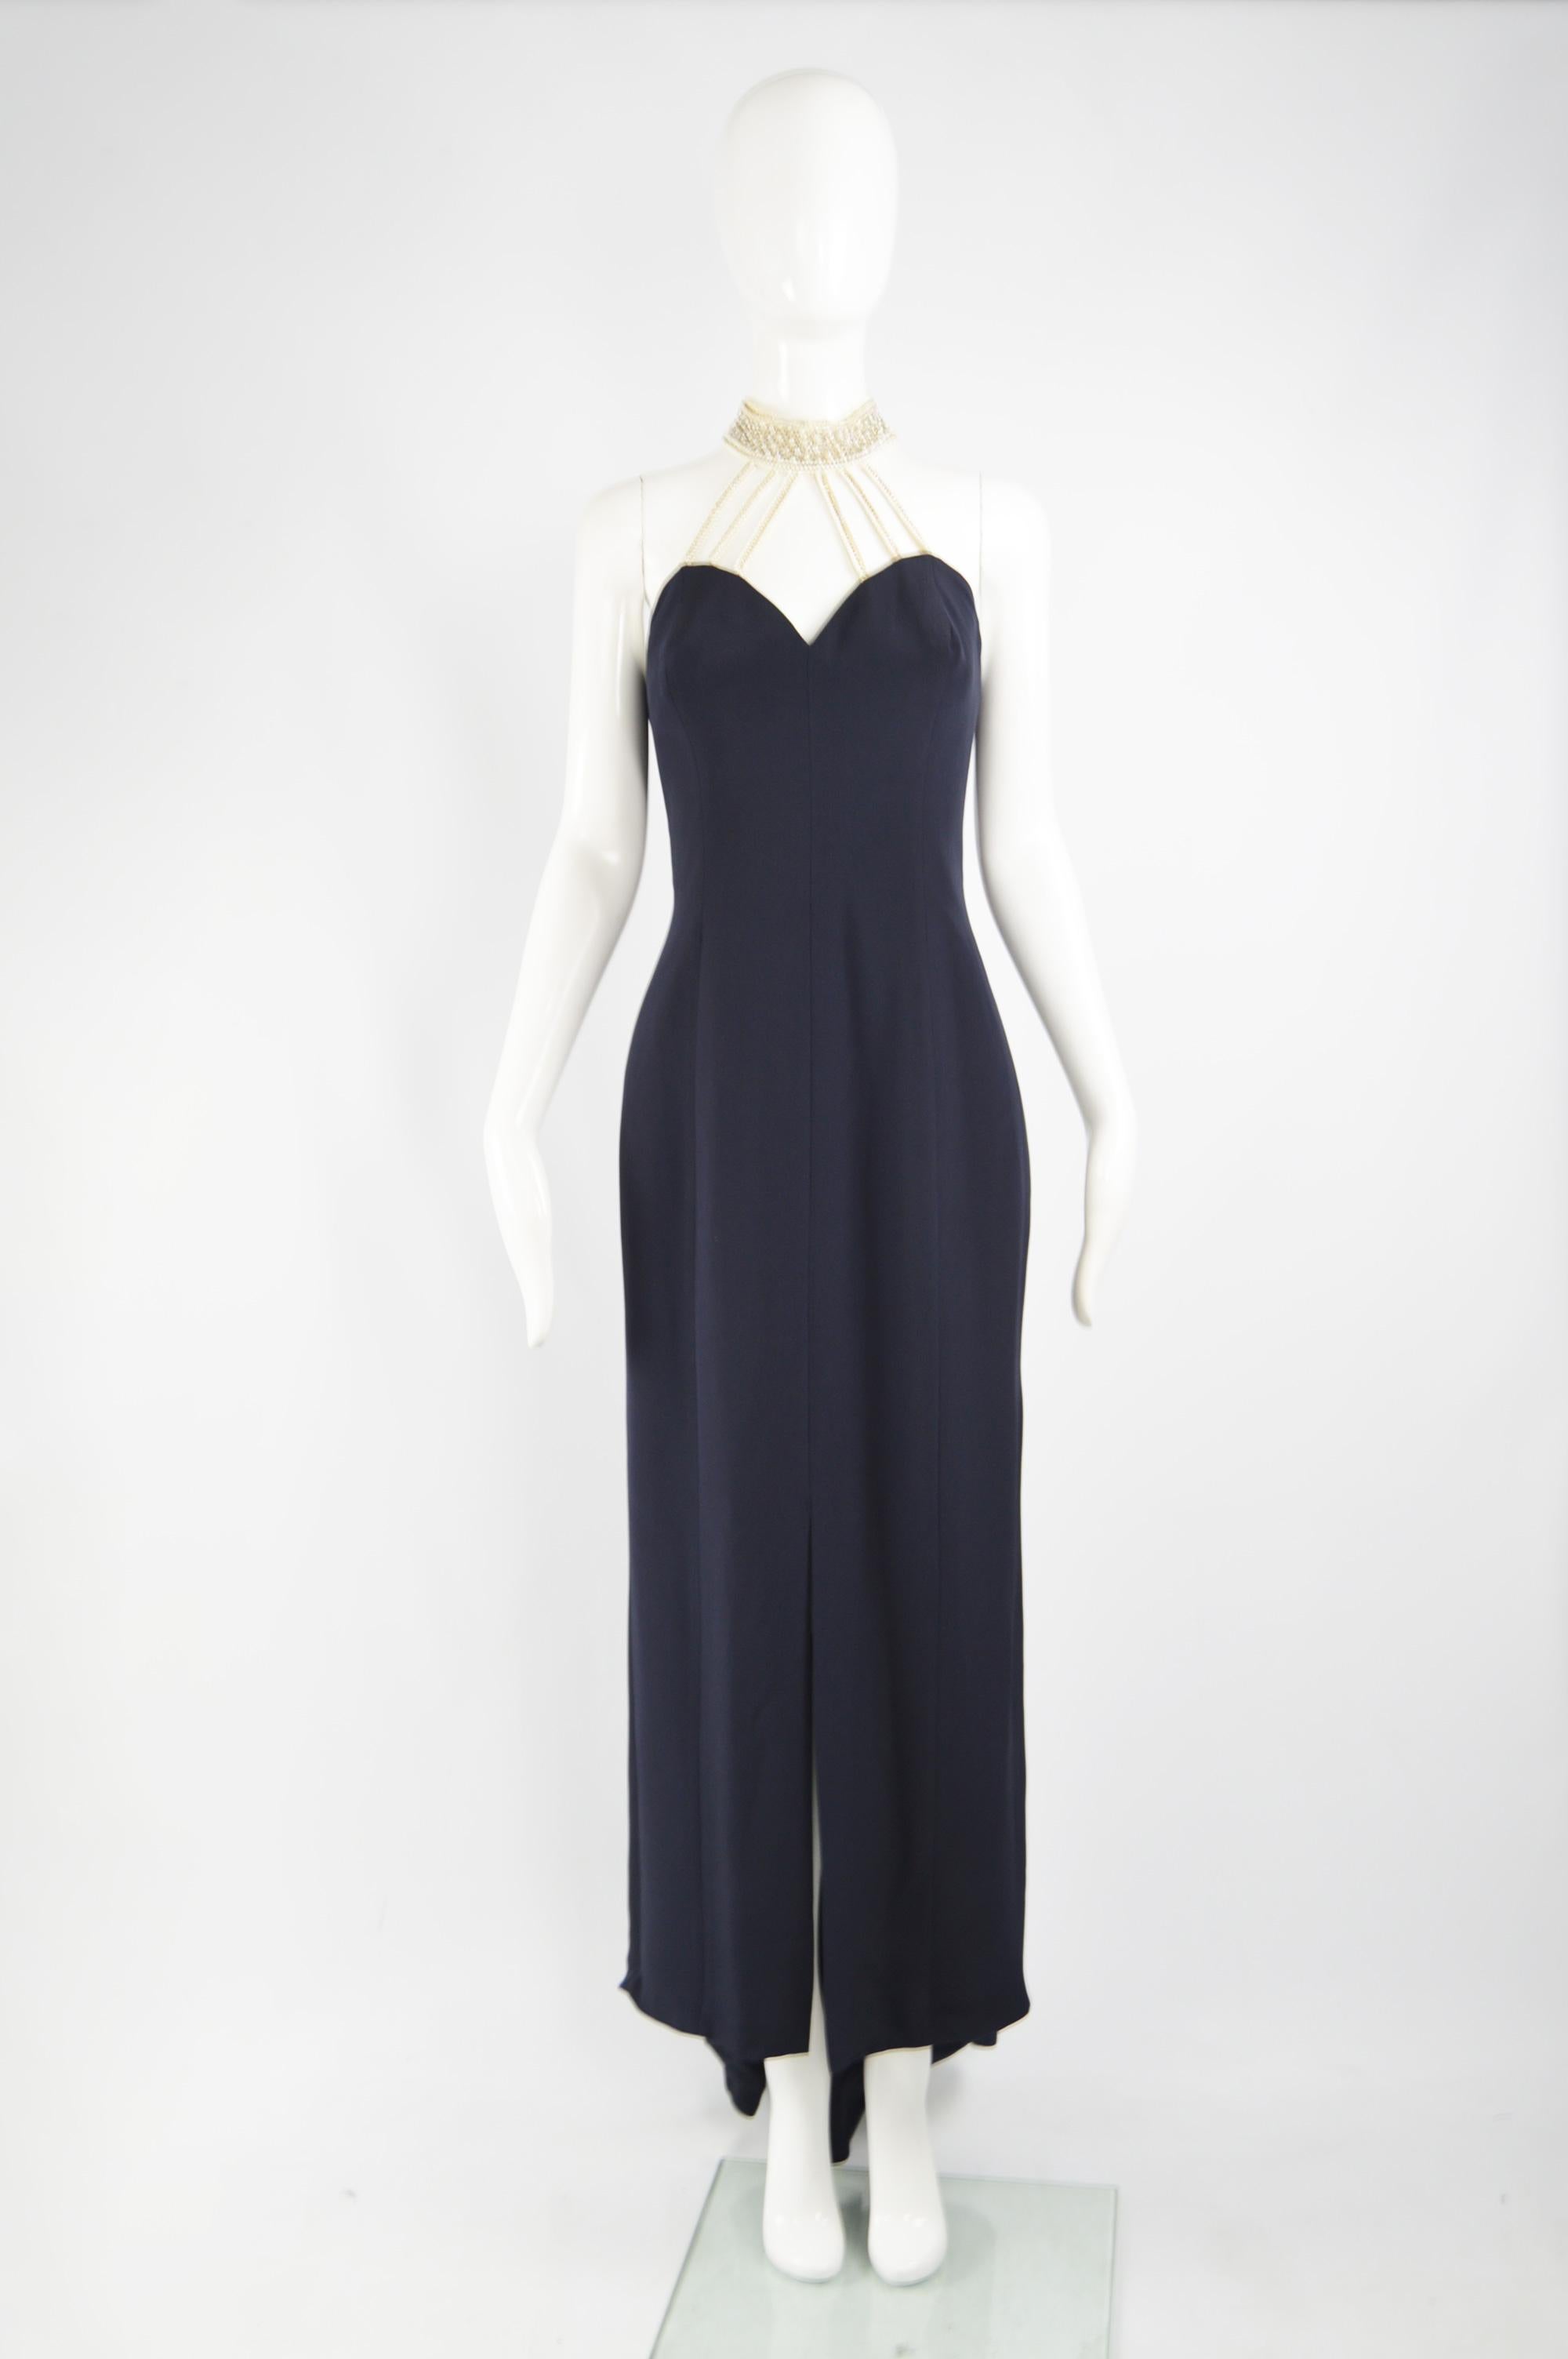 A fabulous vintage Escada evening gown from the 90s for their high end Couture line. In a blue silk and polyester with faux pearl beads creating a choker style neckline. Perfect for a formal party or red carpet event. 

Size: Marked EU 40 which